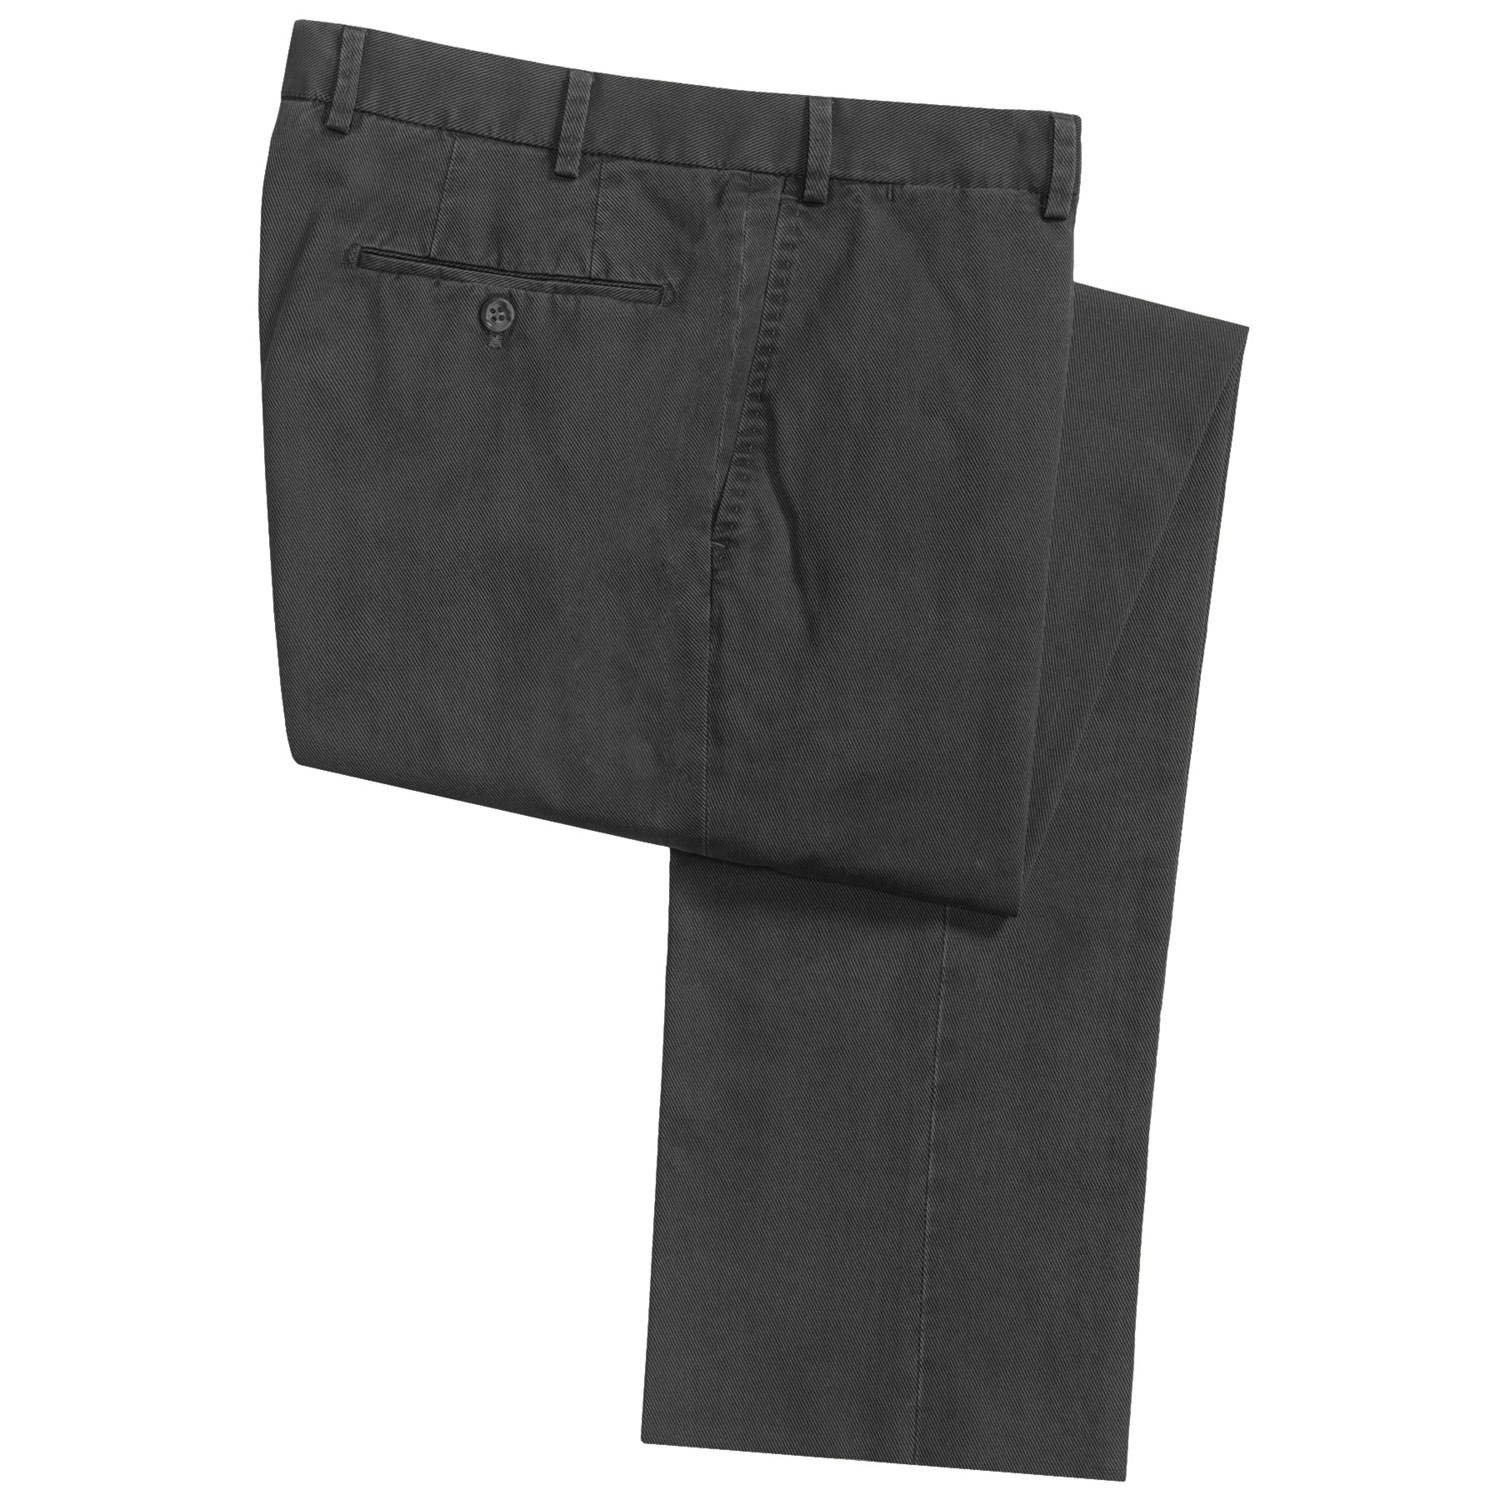 Hiltl Dayne Fade-Out Twill Pants - Stretch Cotton (For Men) - Save 46%